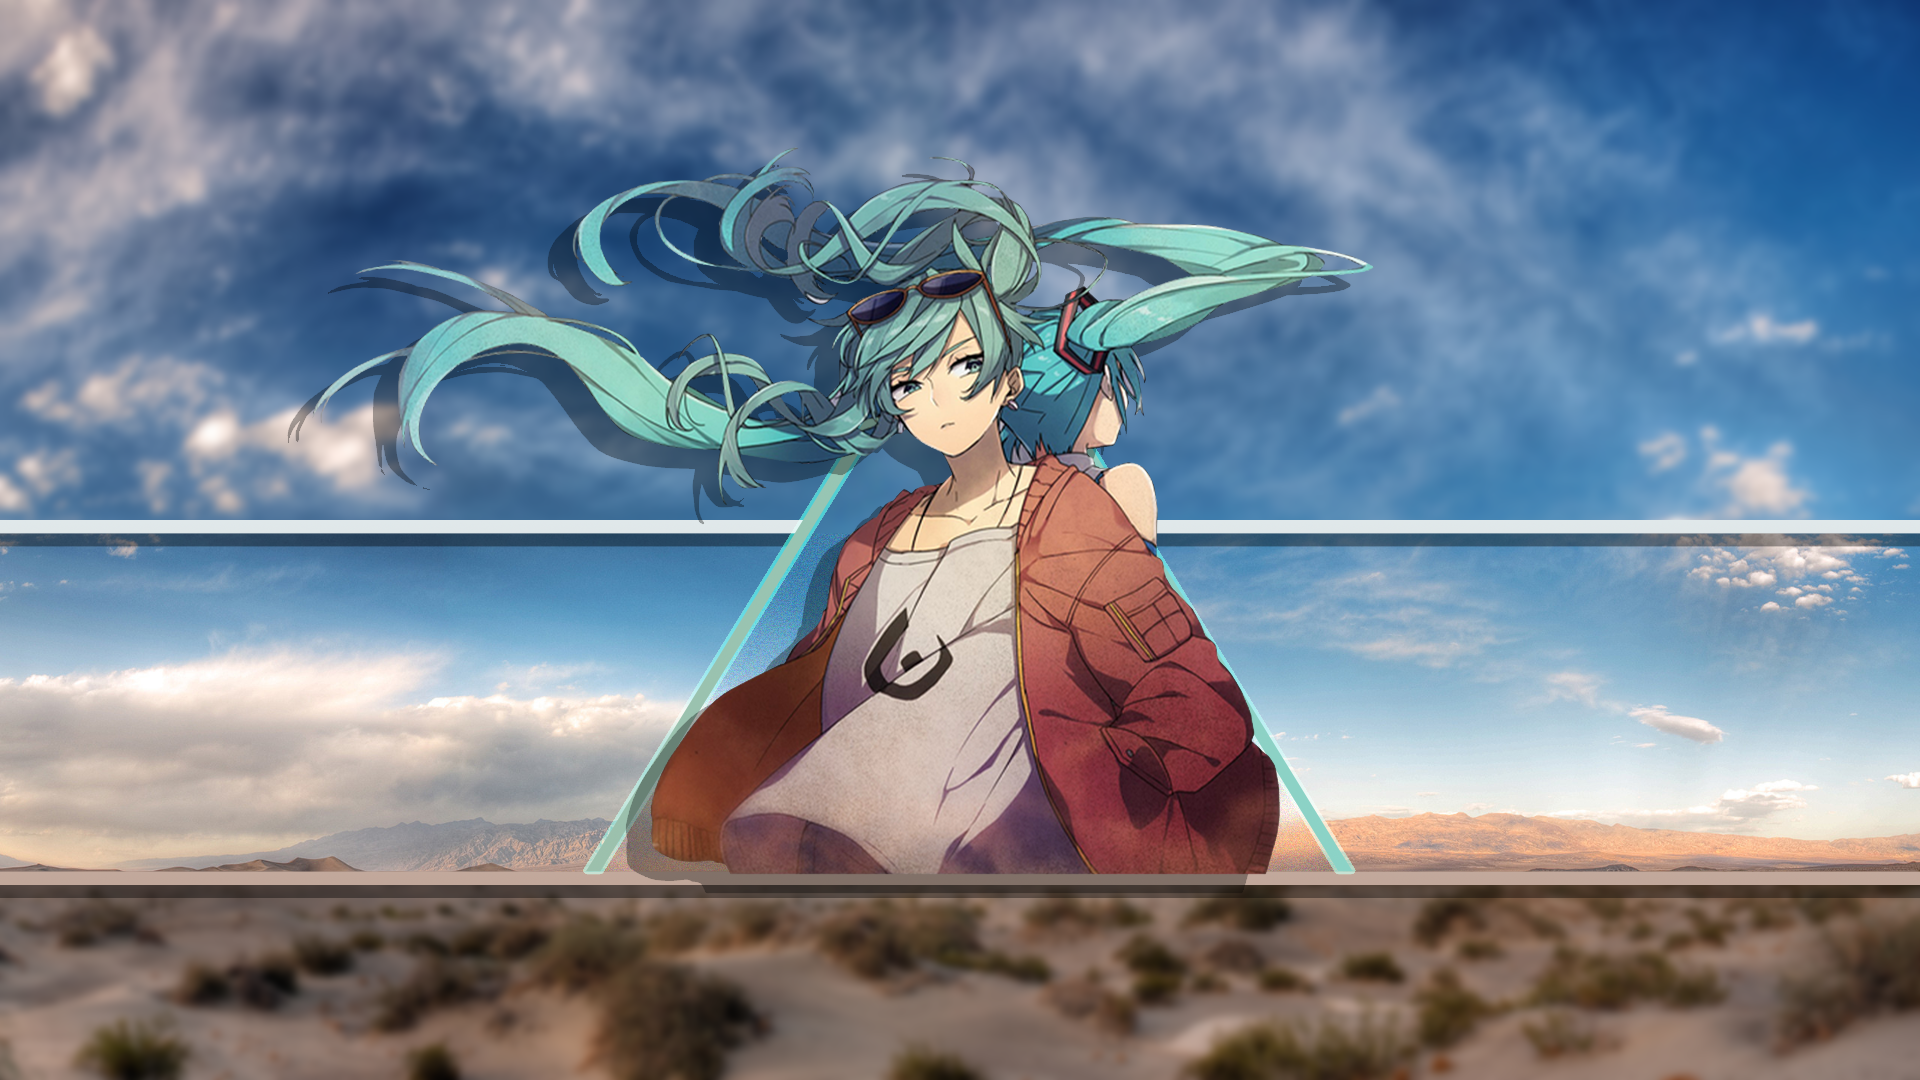 Picture In Picture Anime Girls Hatsune Miku Desert Sky Clouds Twintails Sunglasses Vocaloid Long Hai 1920x1080